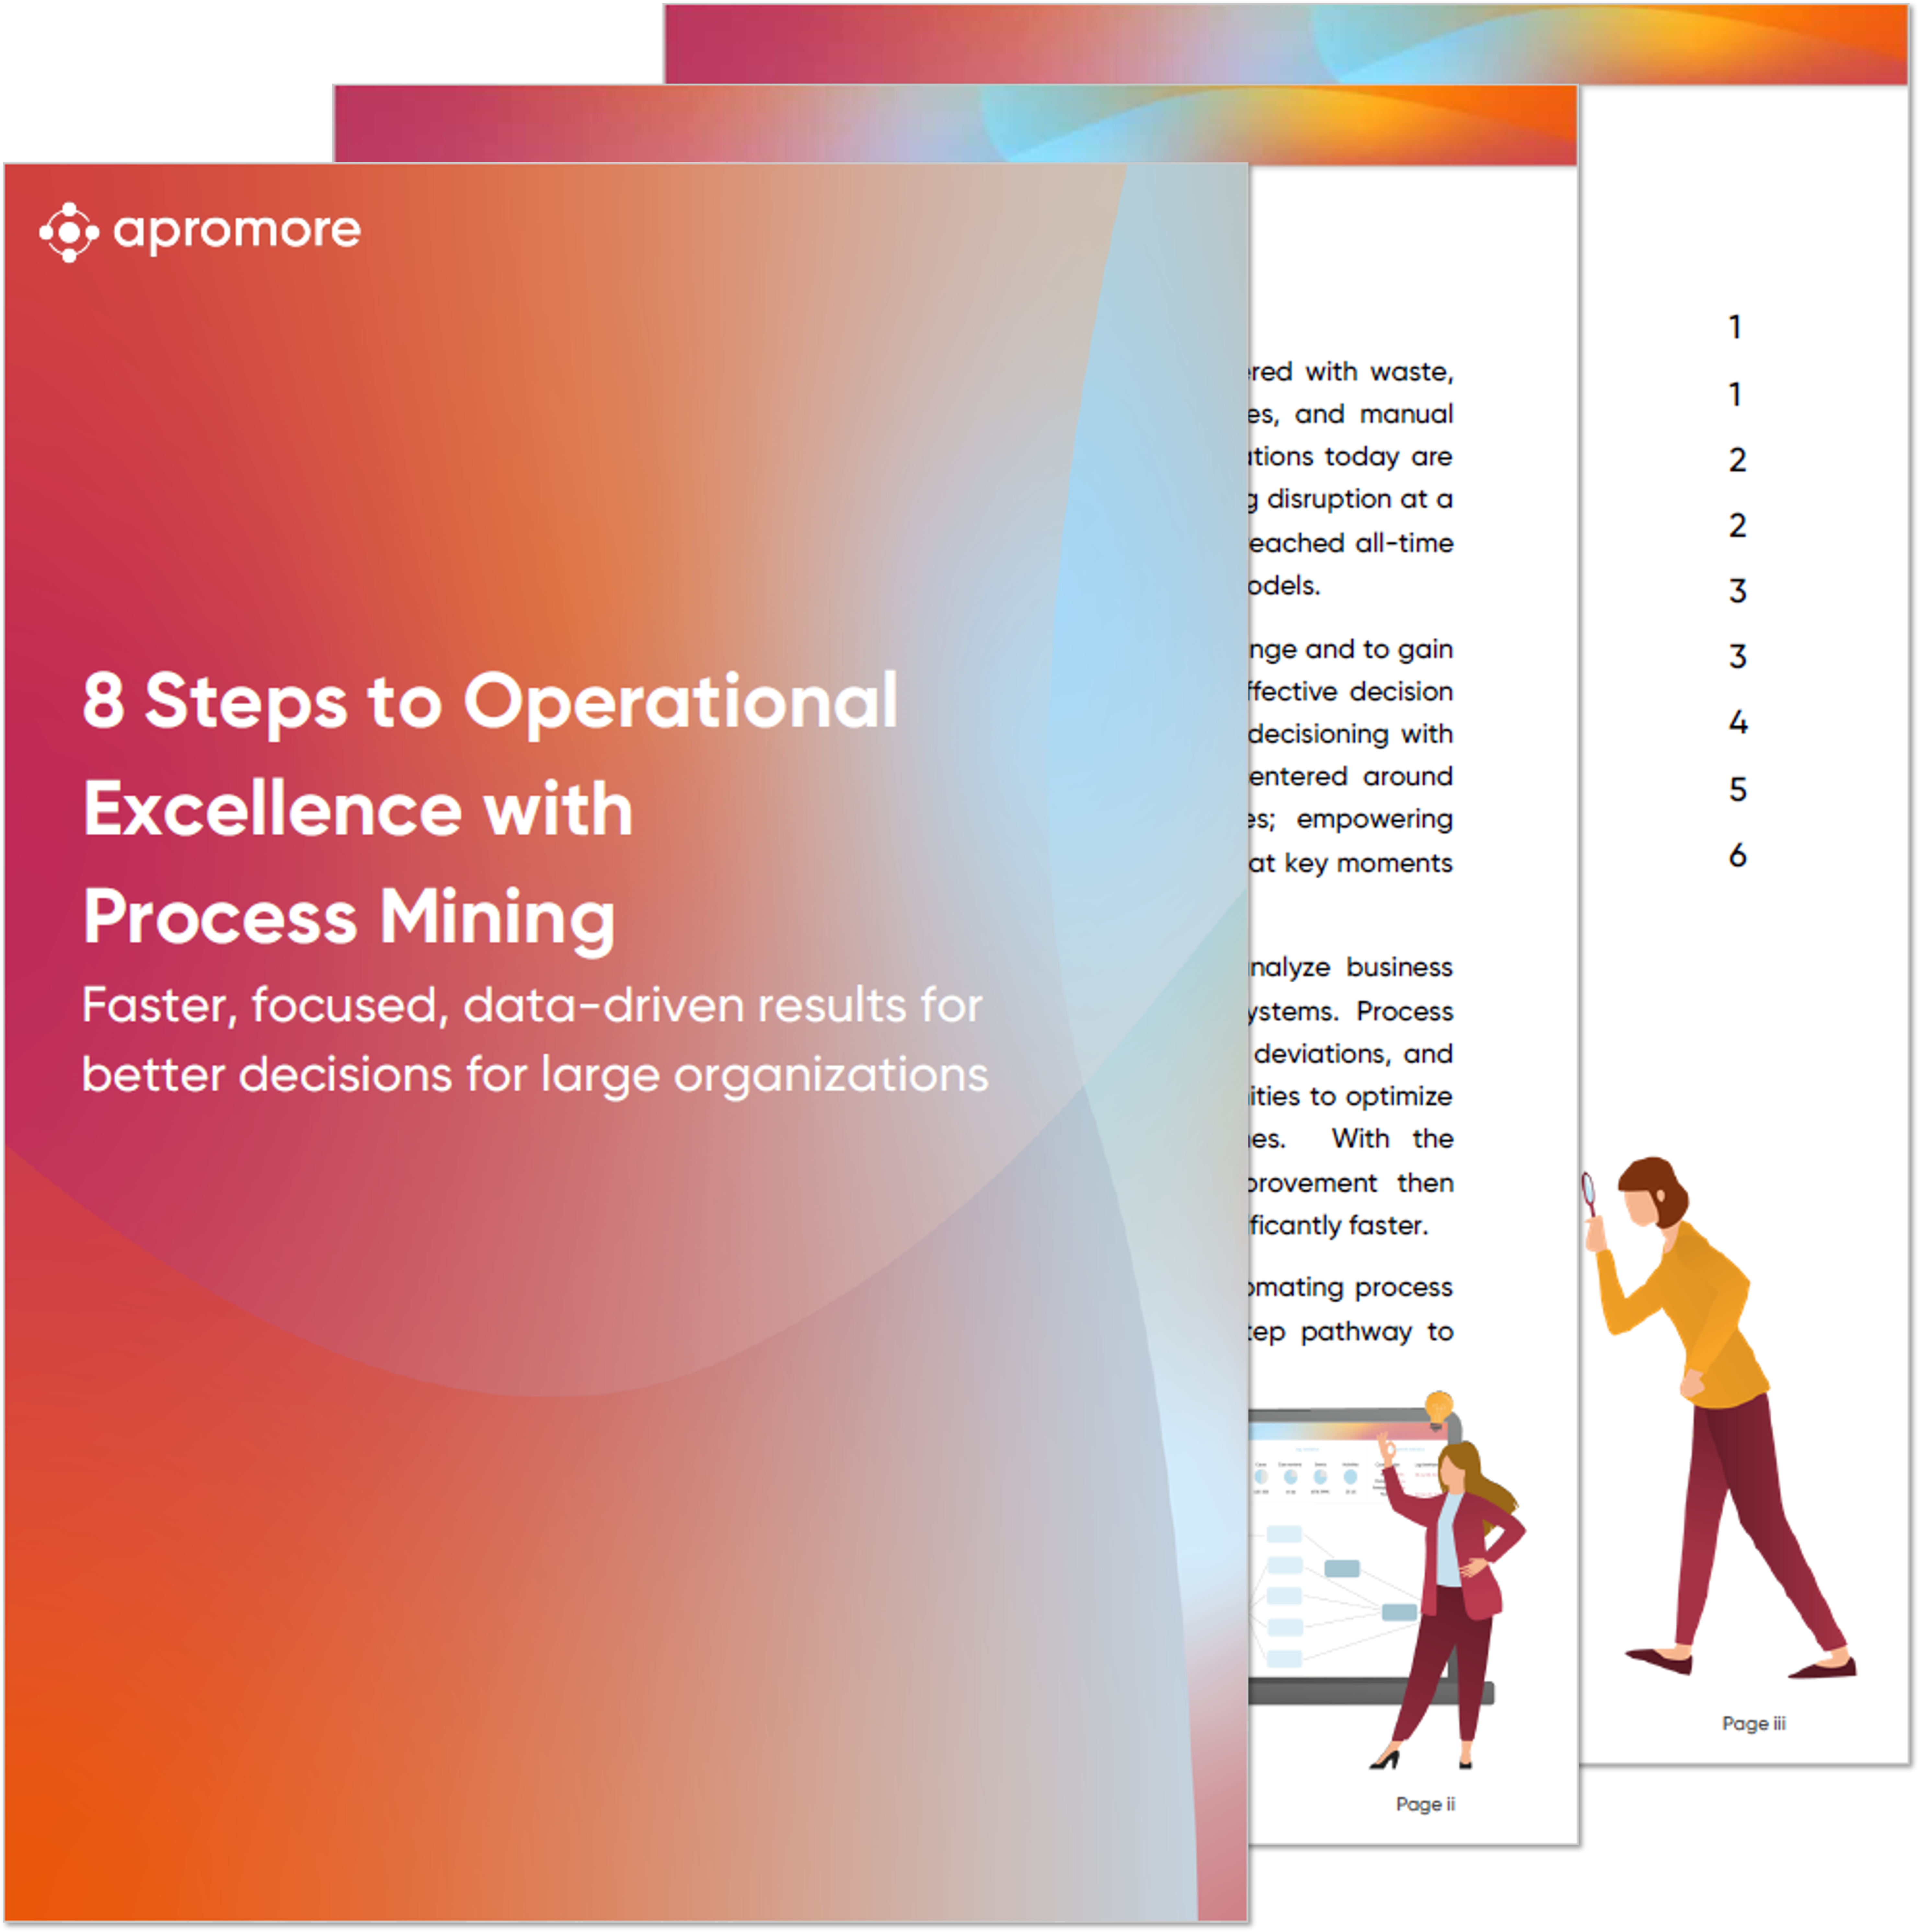 8 Steps to Operational Excellence with Process Mining